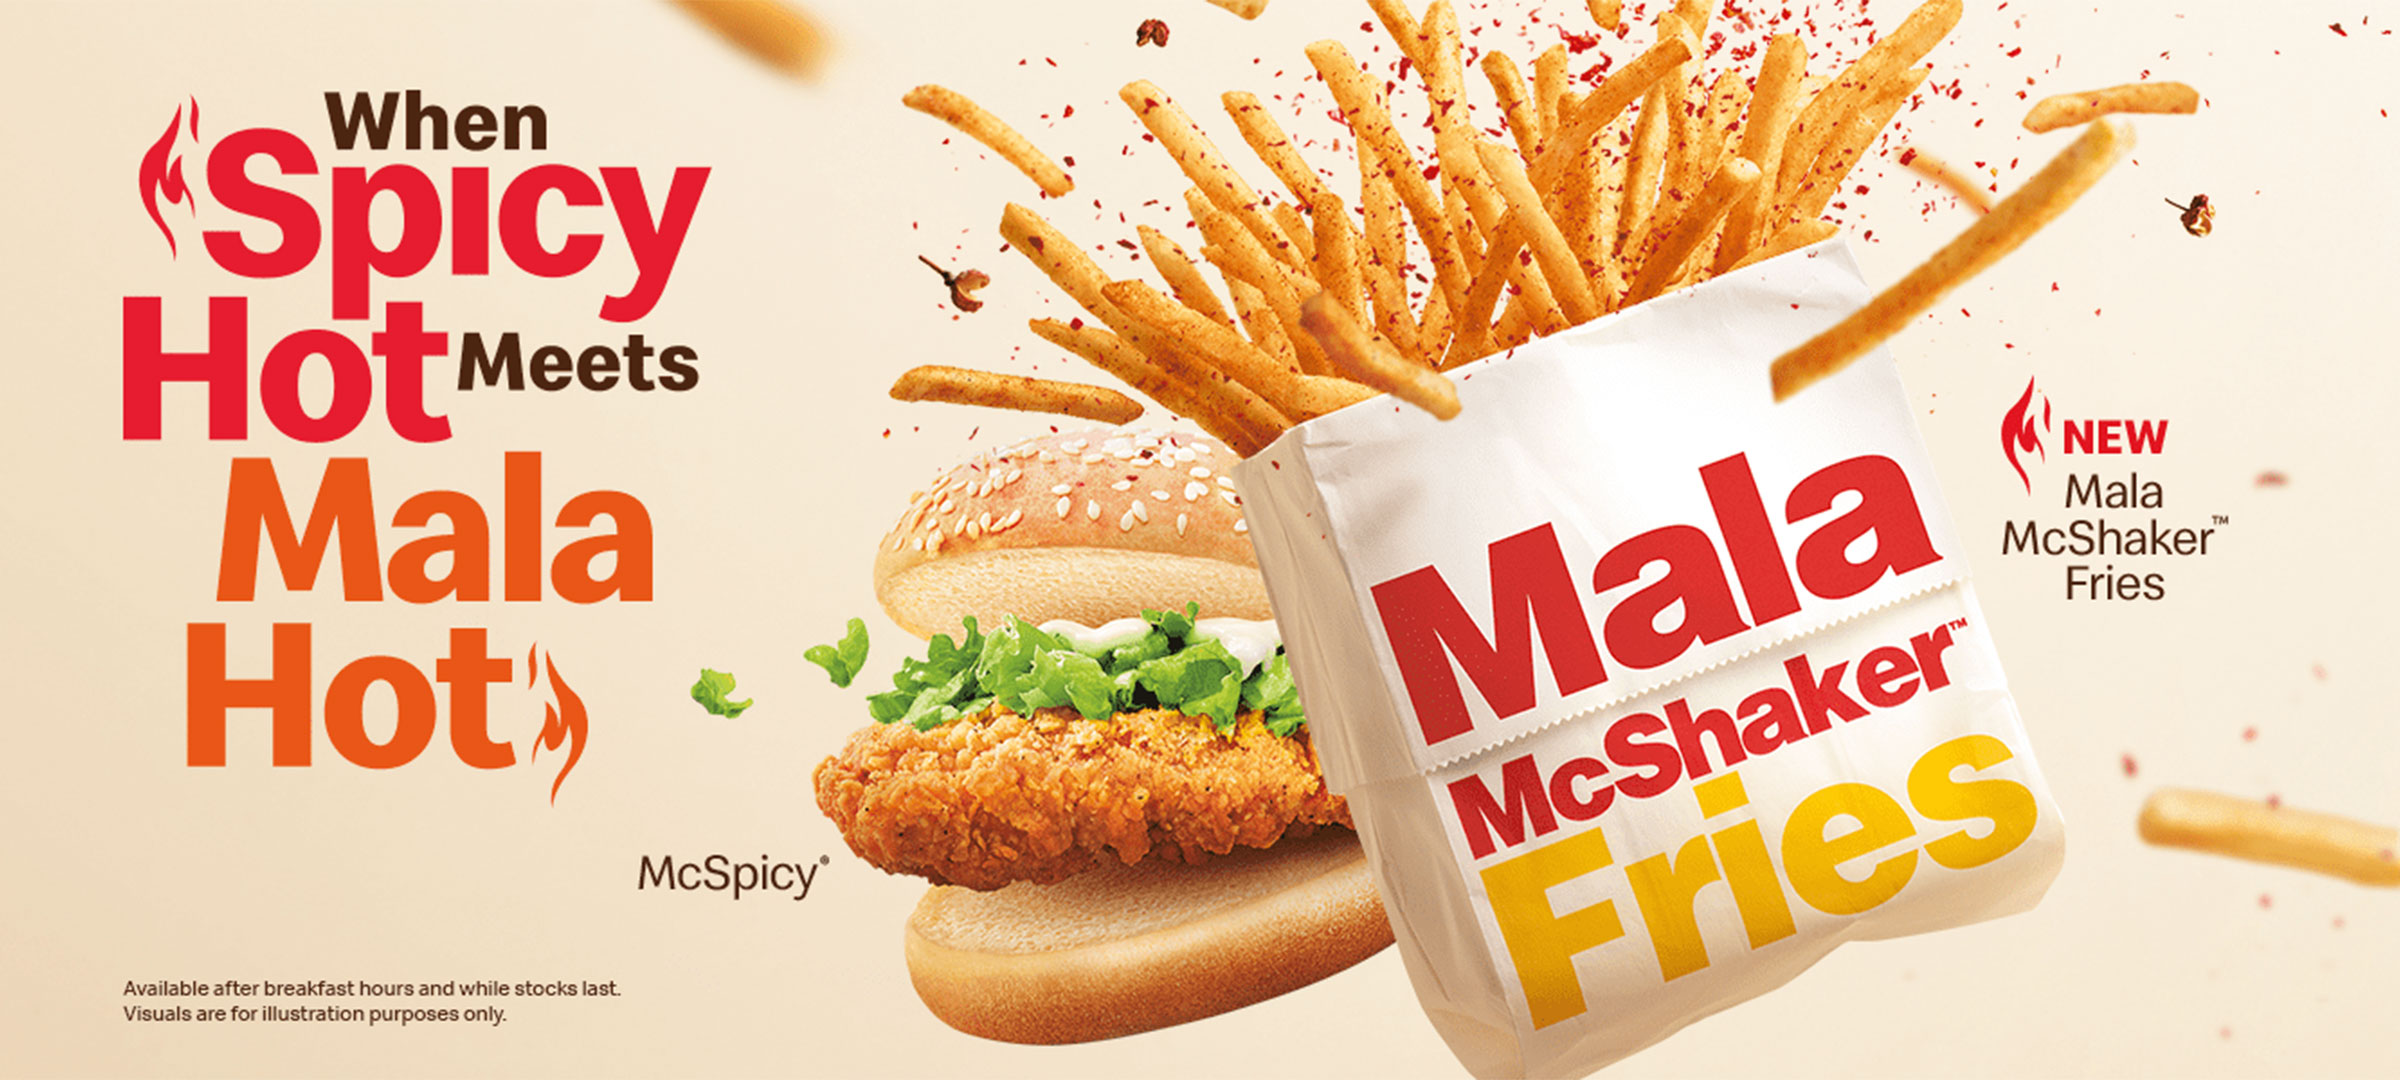 All new Mala McShaker Fries to turn up the Heat for the New Year